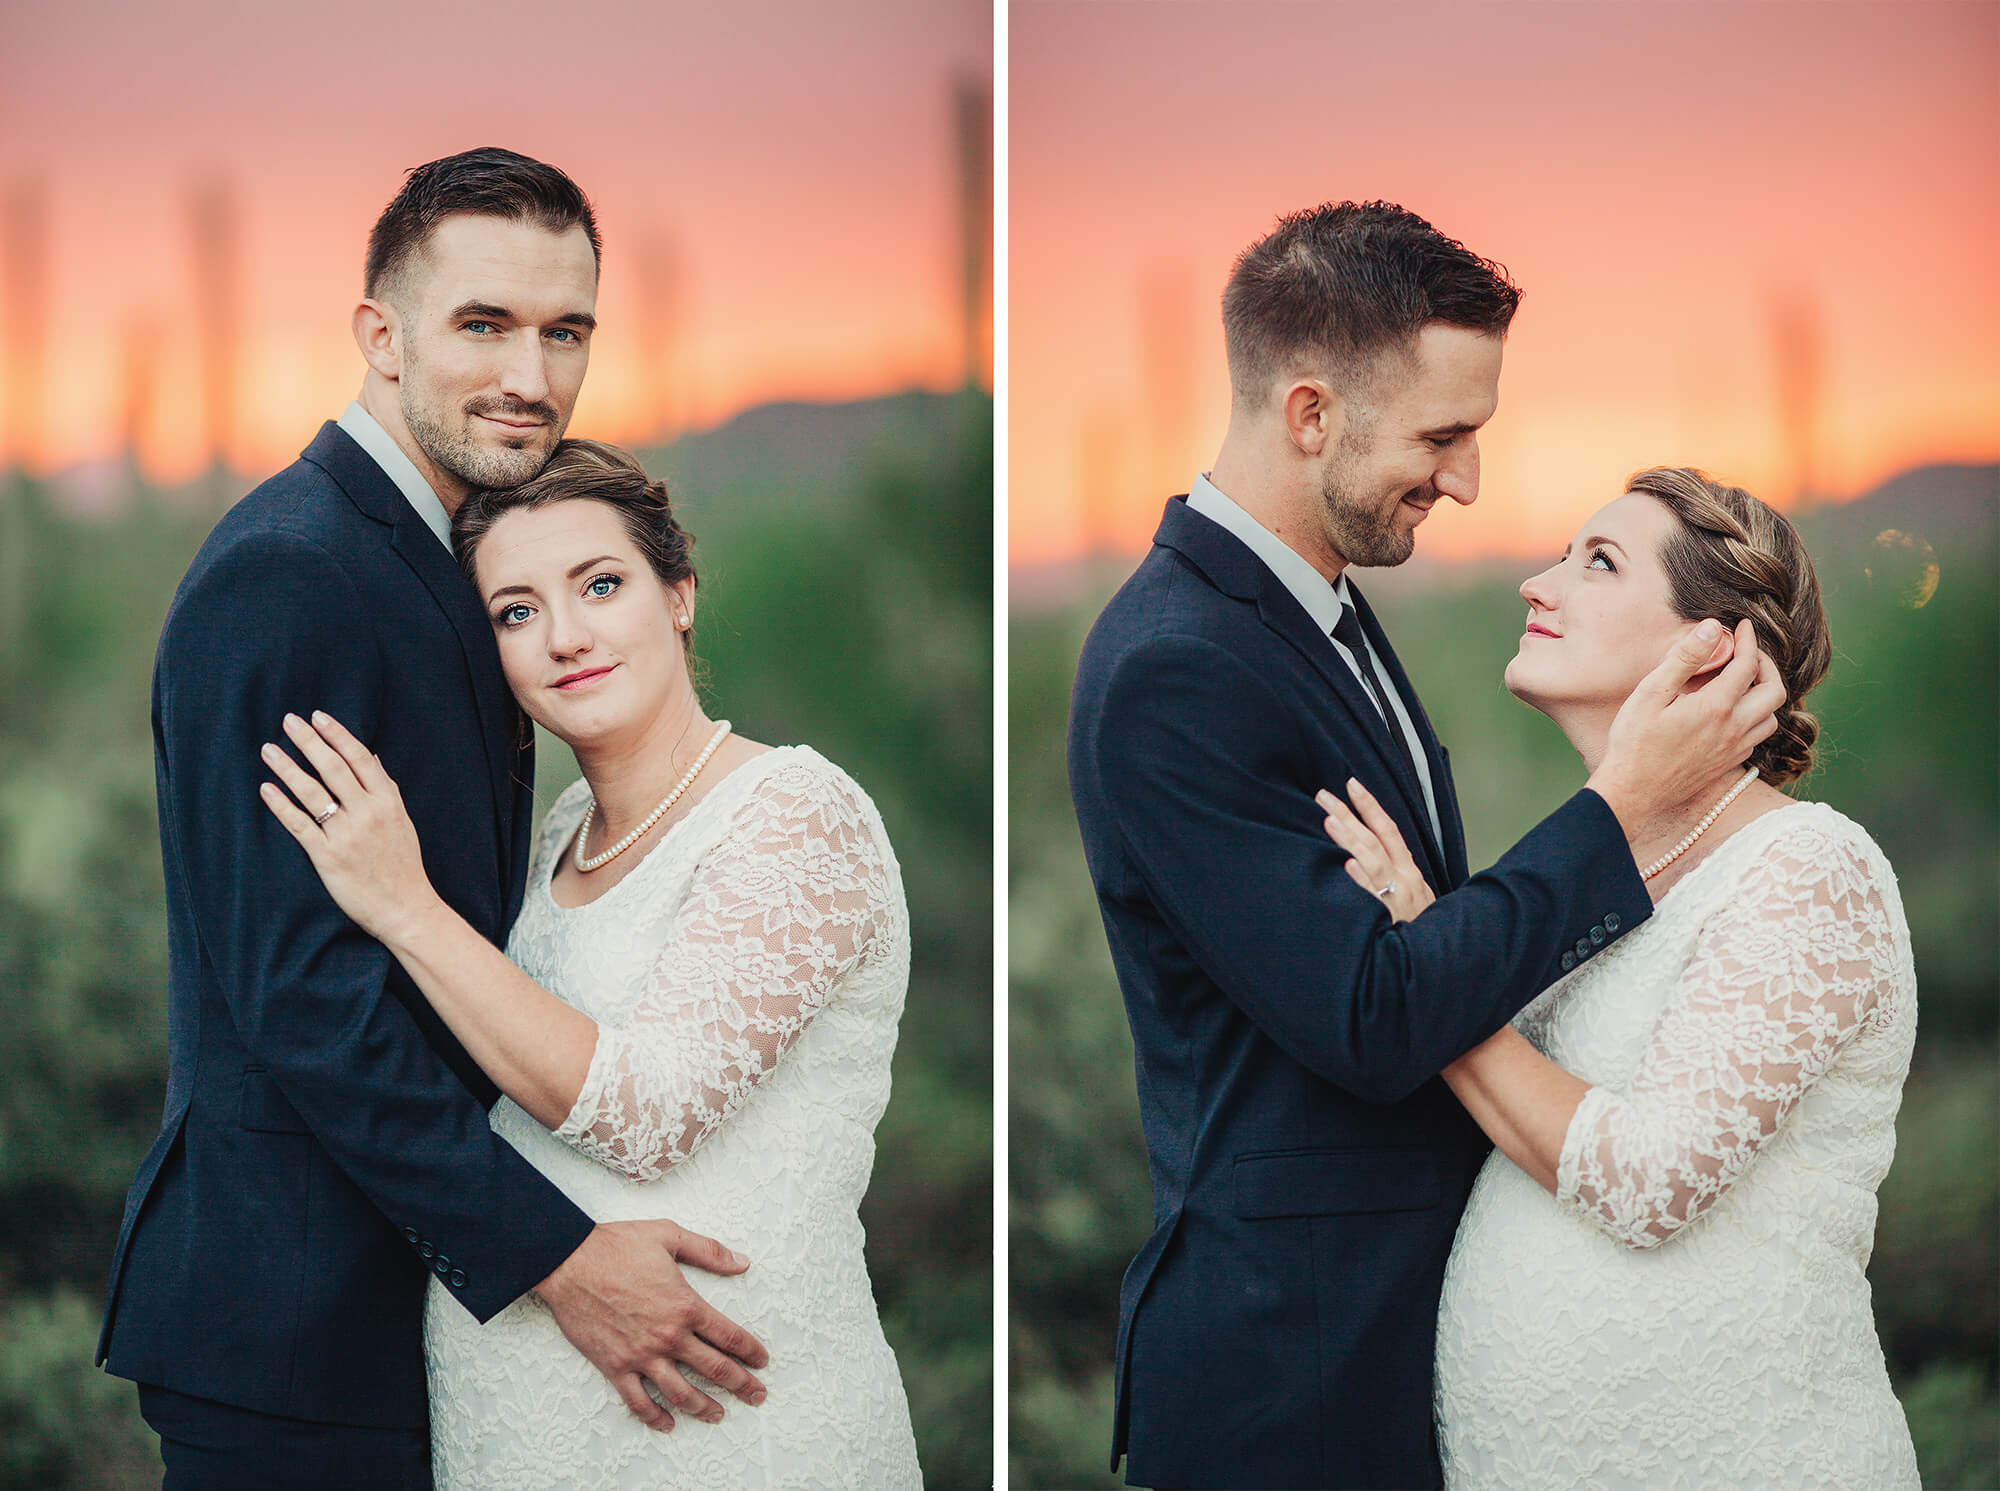 Amanda and Kenneth beautifully illuminated by the brilliants pinks and oranges of the setting sun during their elopement in Tucson.